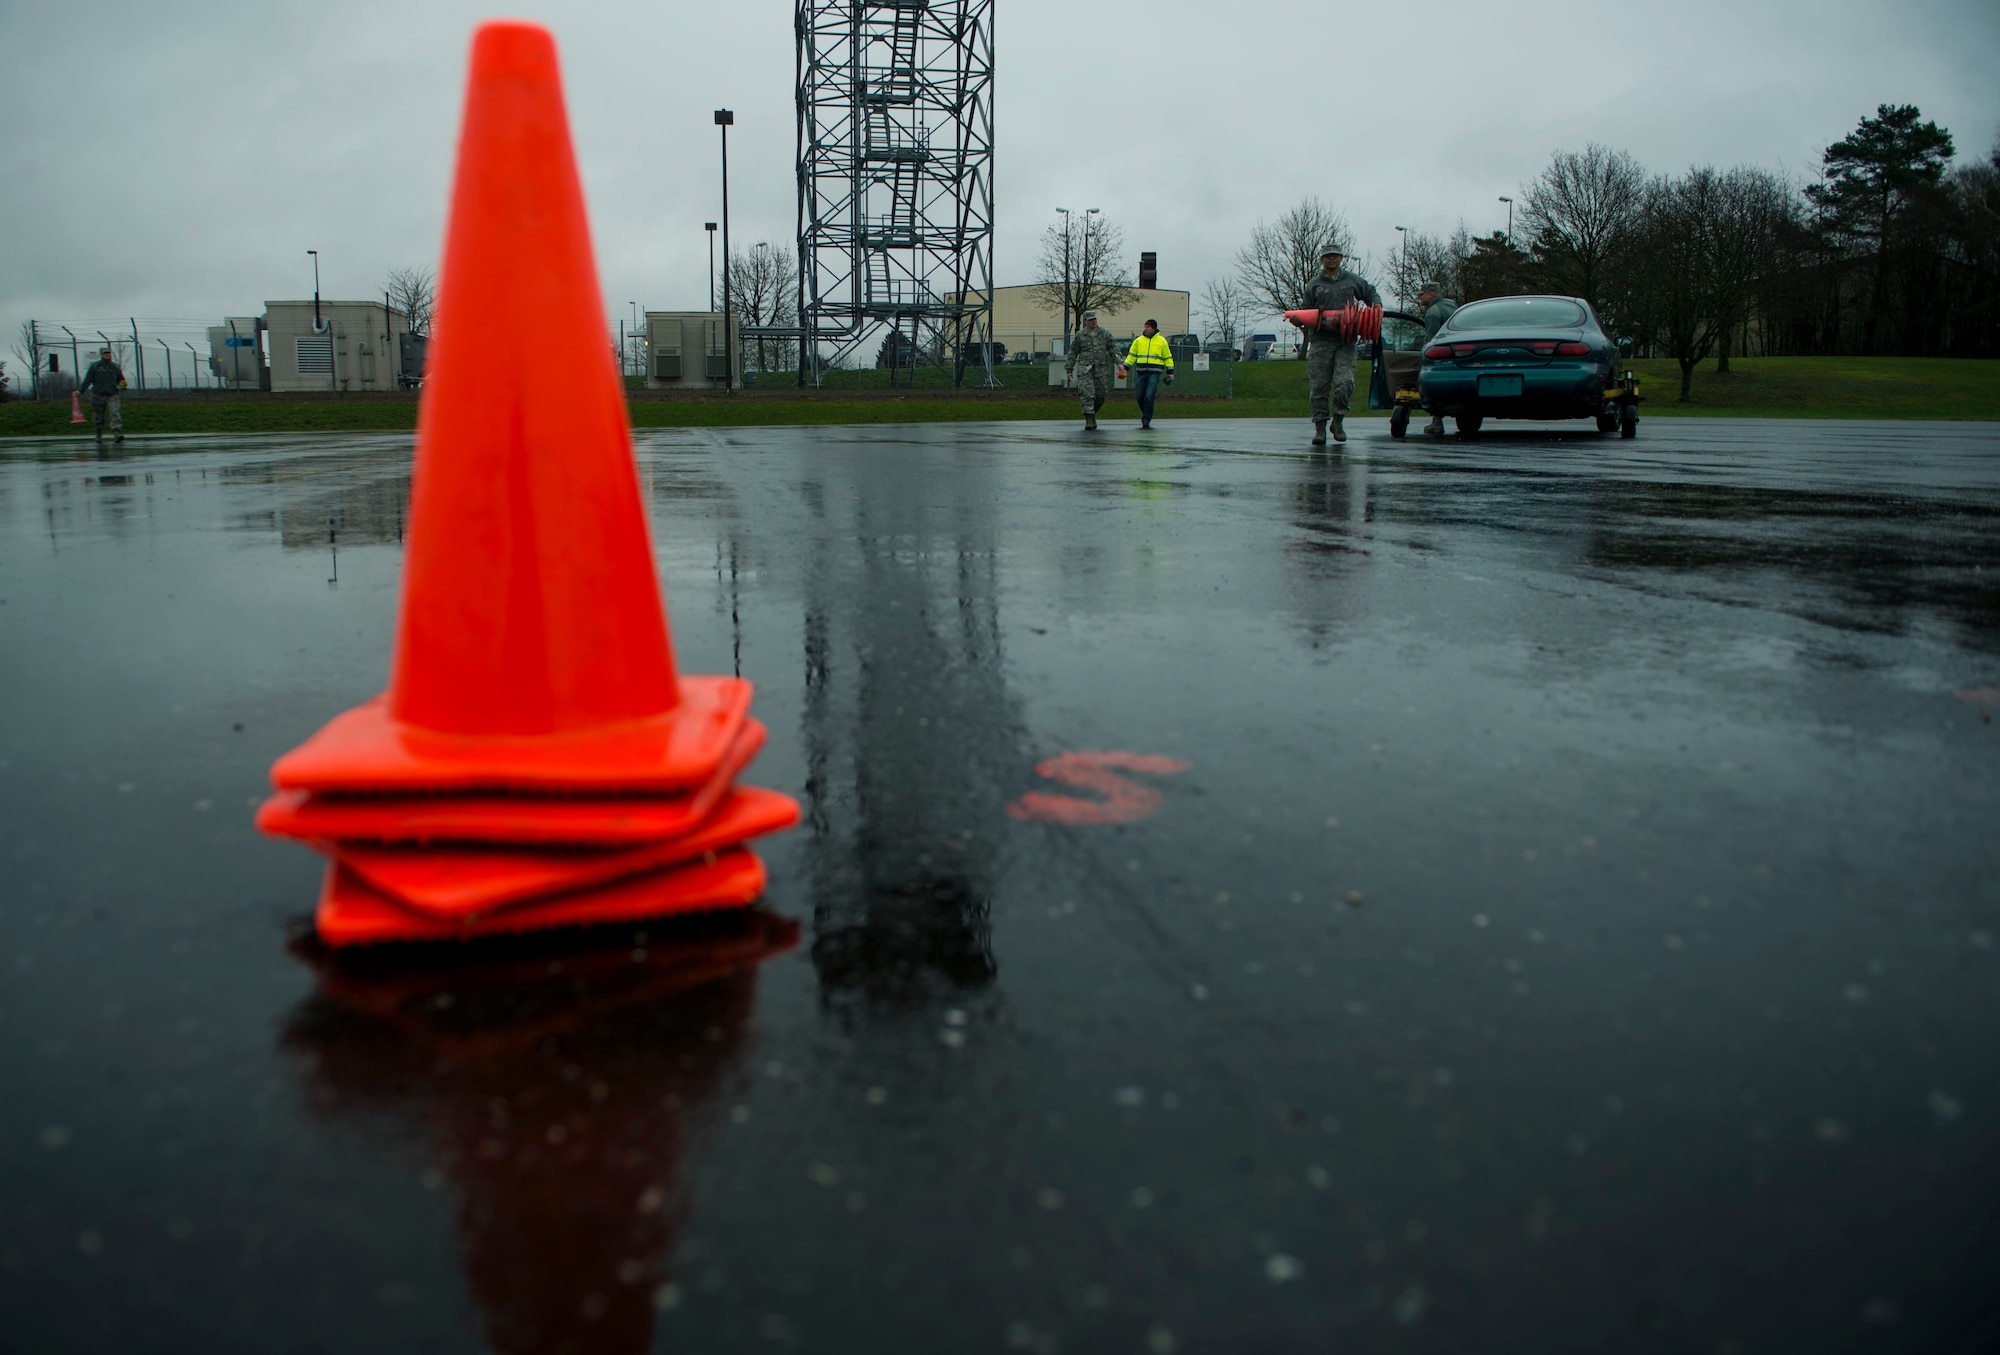 U.S. Air Force Staff Sgt. Brittany McGill, a 52nd Fighter Wing Safety occupational safety and health technician, picks up cones after a training session at the Saber Driving Course at Spangdahlem Air Base, Germany, Jan. 11, 2016. The safety team set up traffic cones around specific markers on the driving course designed for trainees to experience operating a vehicle during specific road conditions. (U.S. Air Force photo by Airman 1st Class Timothy Kim/Released)